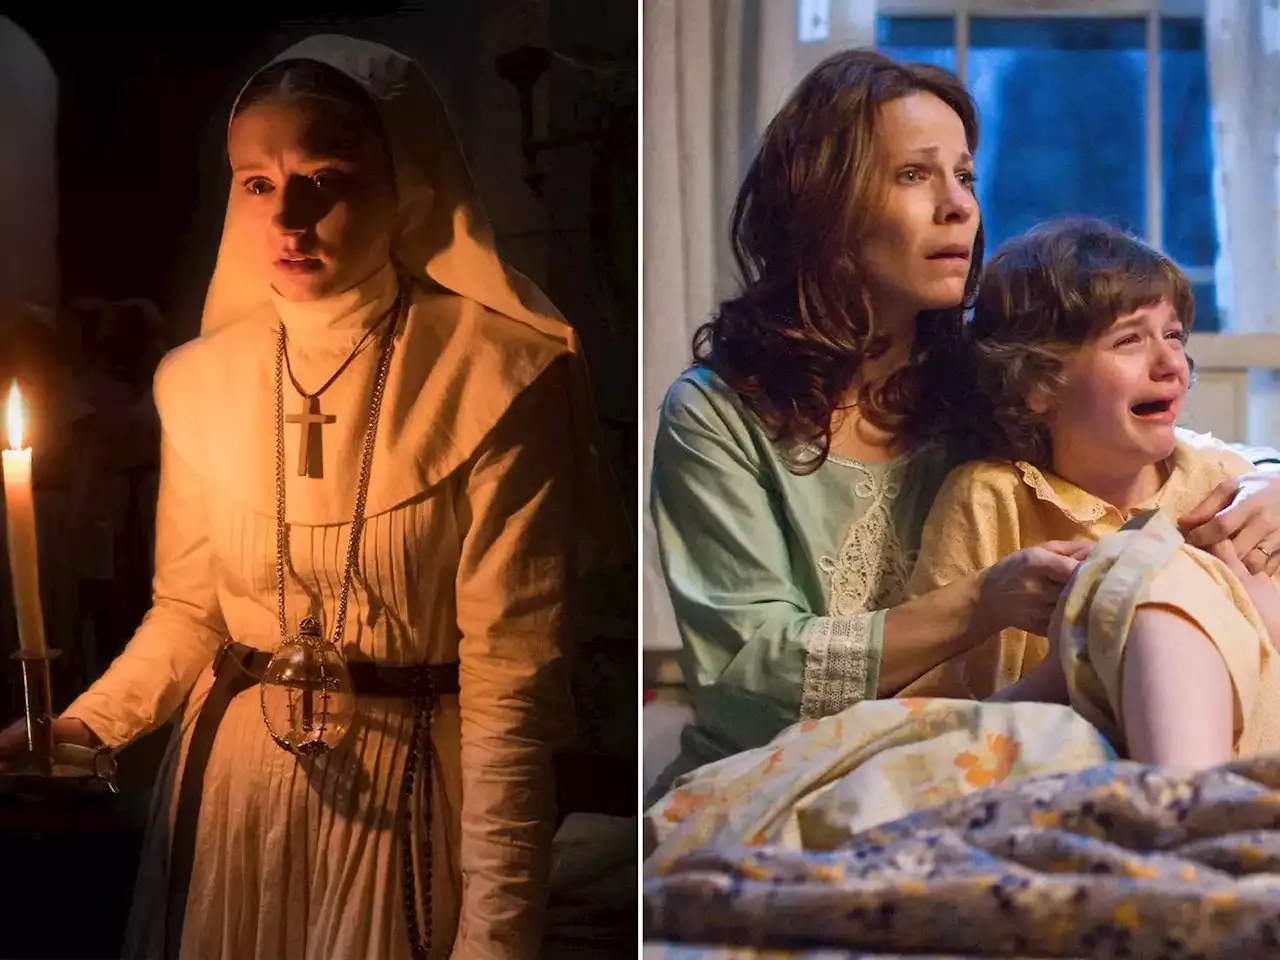 How To Watch The Conjuring Movies In Chronological Order